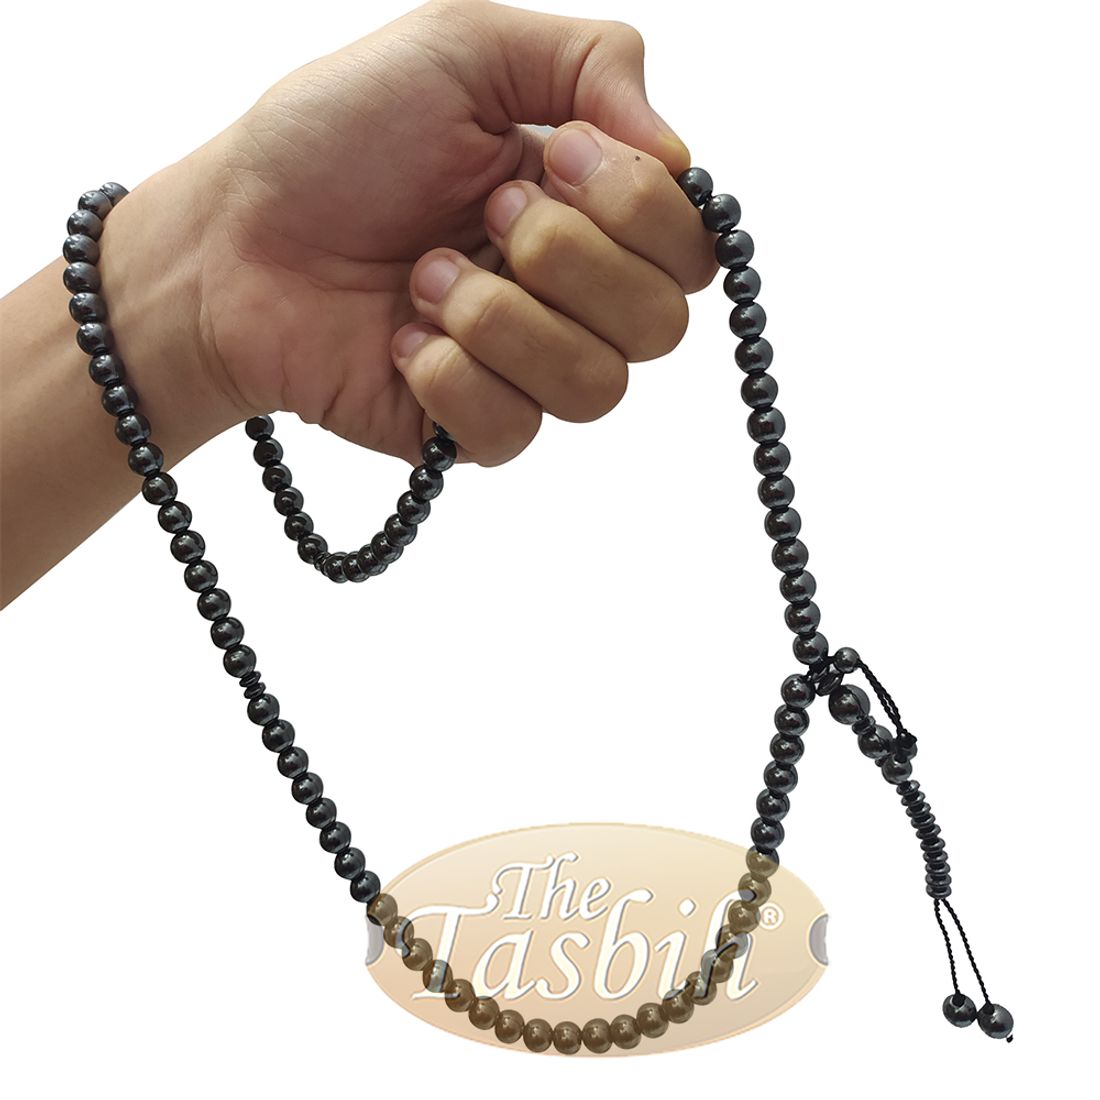 Large 99-bead Tasbih Hematine Stone 8.5mm Beads with Place Marker